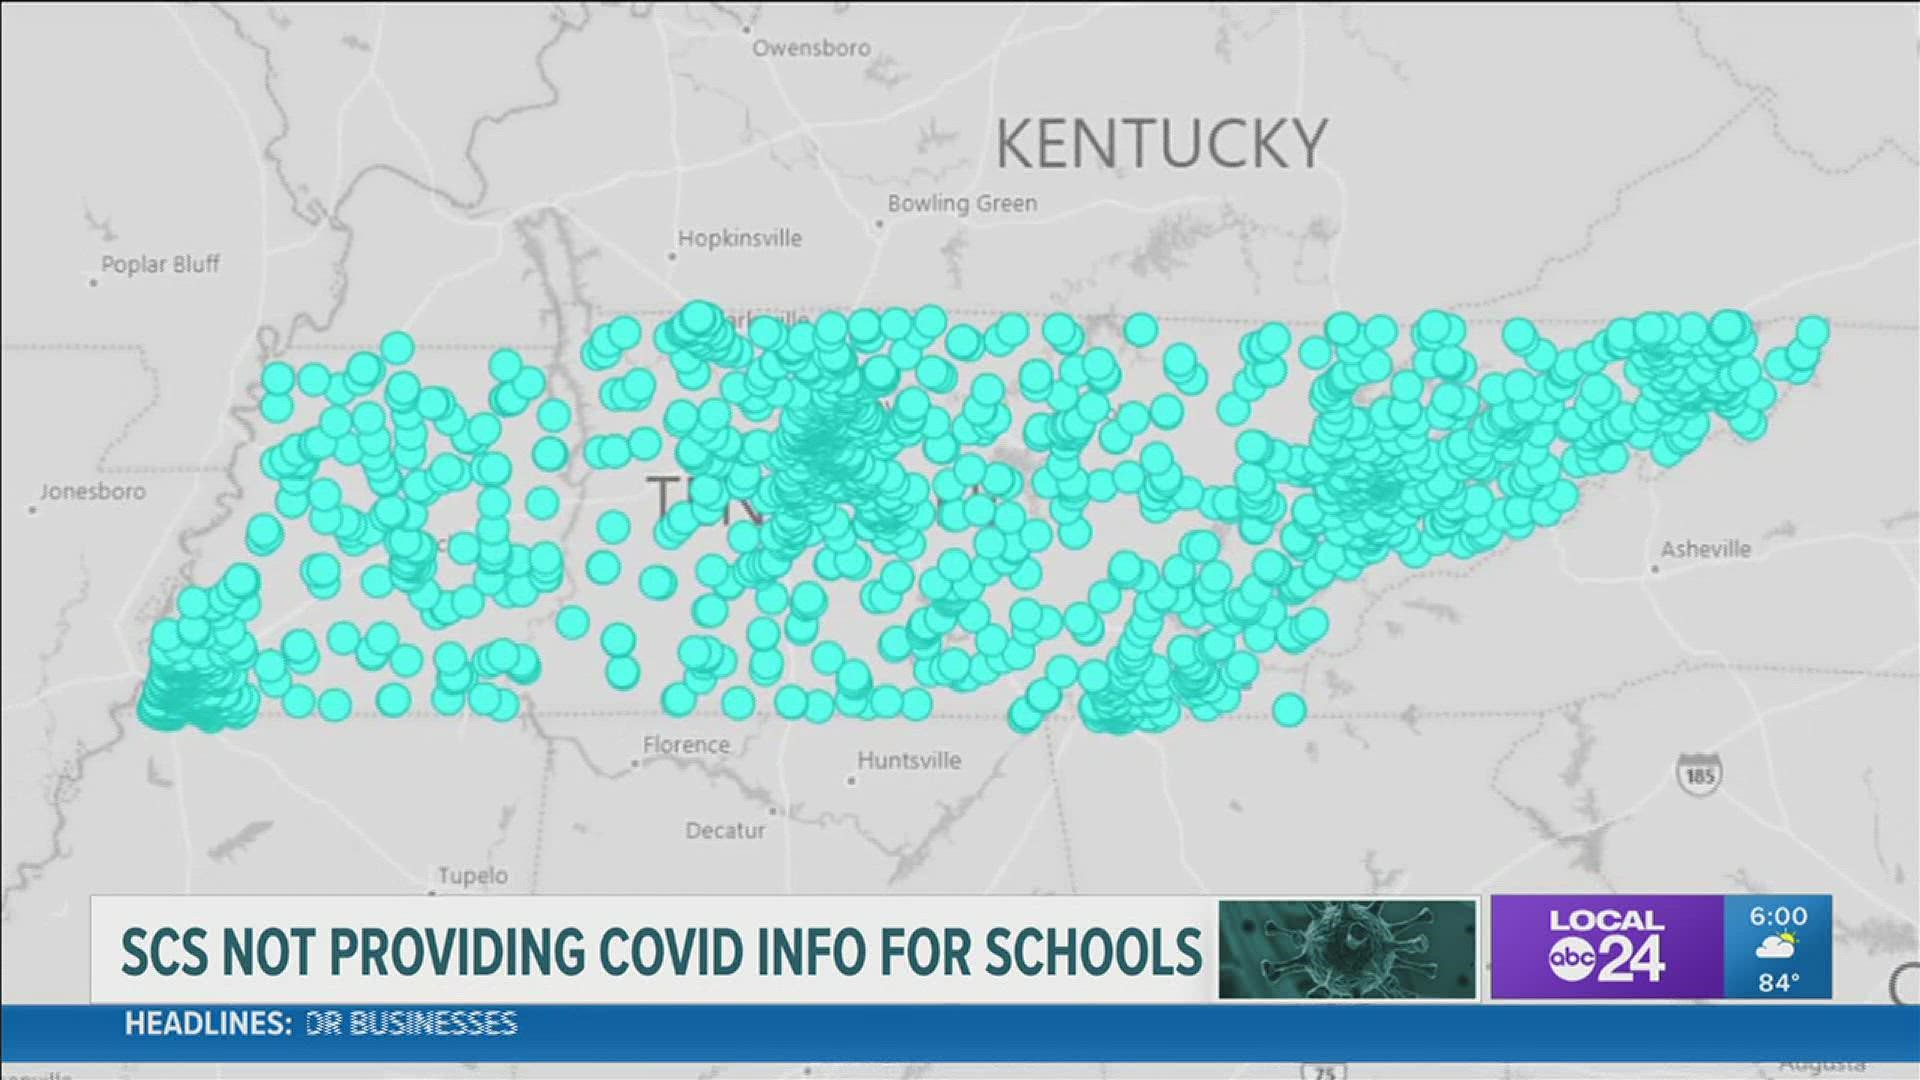 Tennessee Department of Education launched its "District Dashboard" Tuesday, which breaks down the number of COVID cases by both district and school.